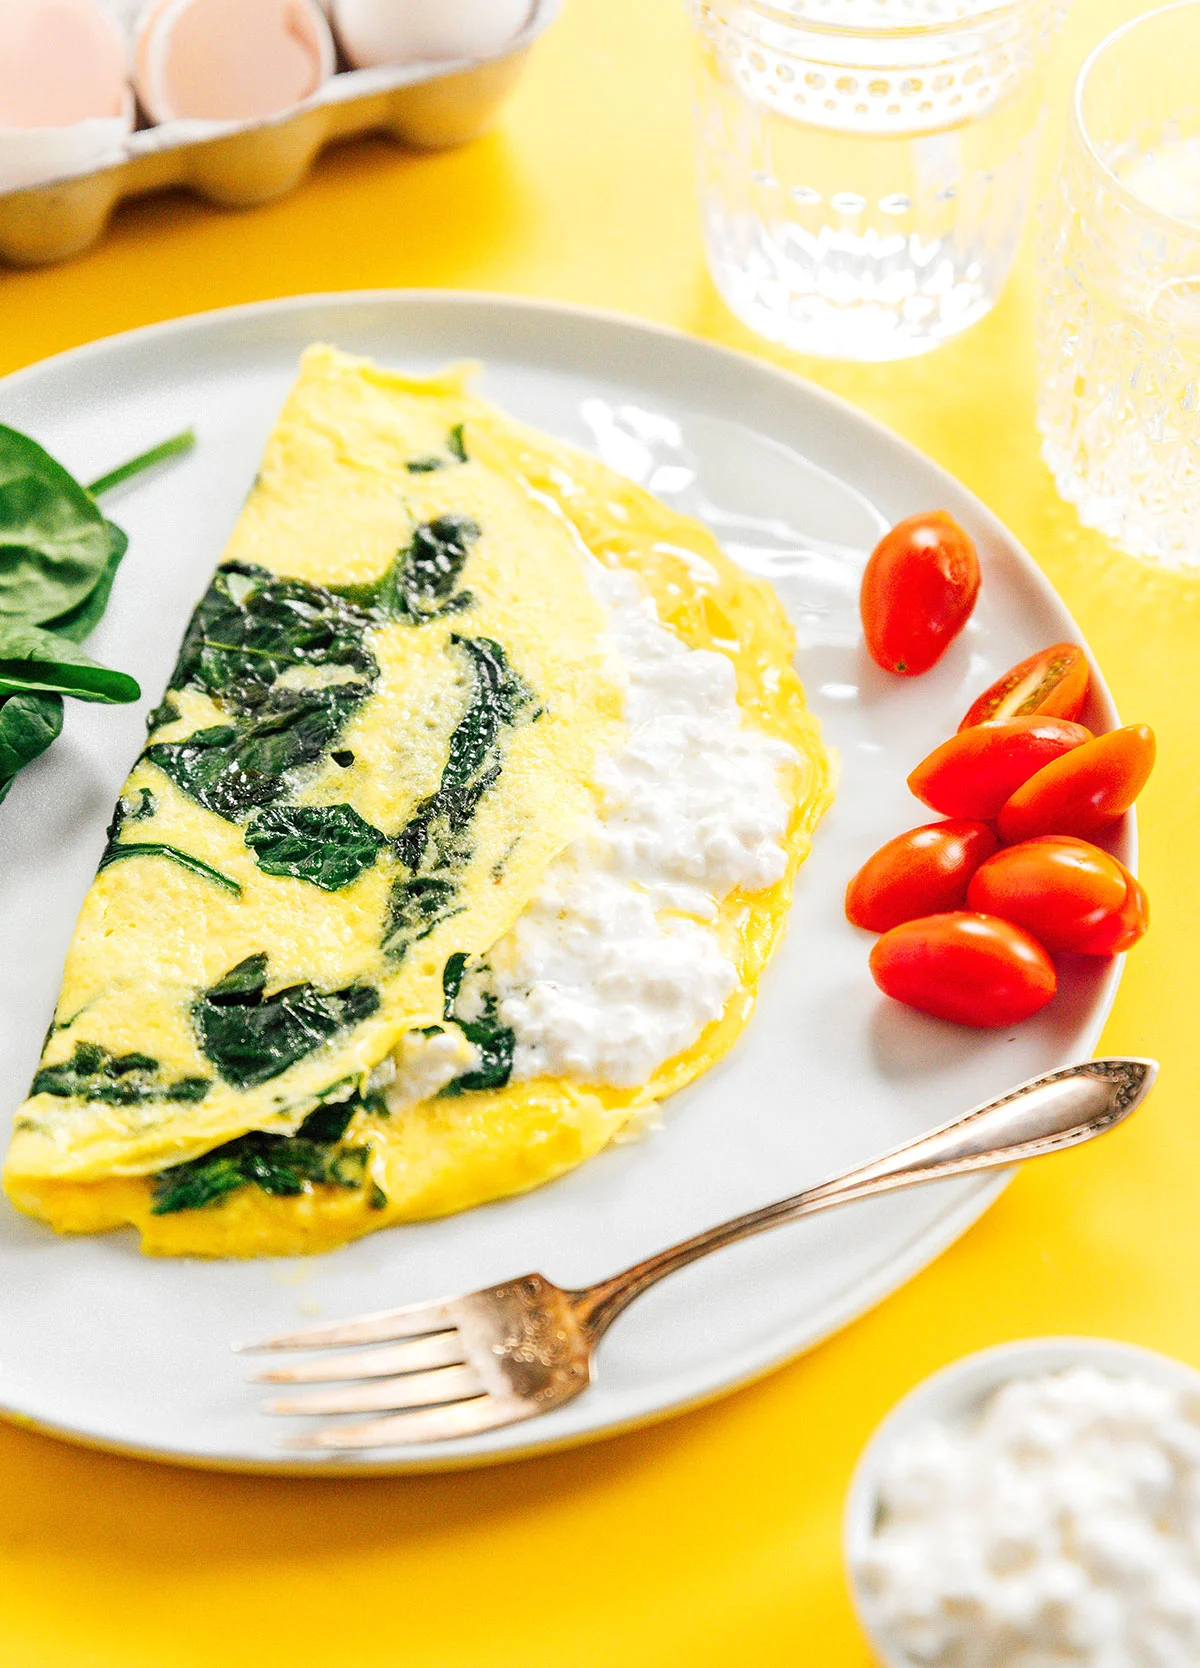 A cottage cheese omelette with spinach on a plate with cherry tomatoes